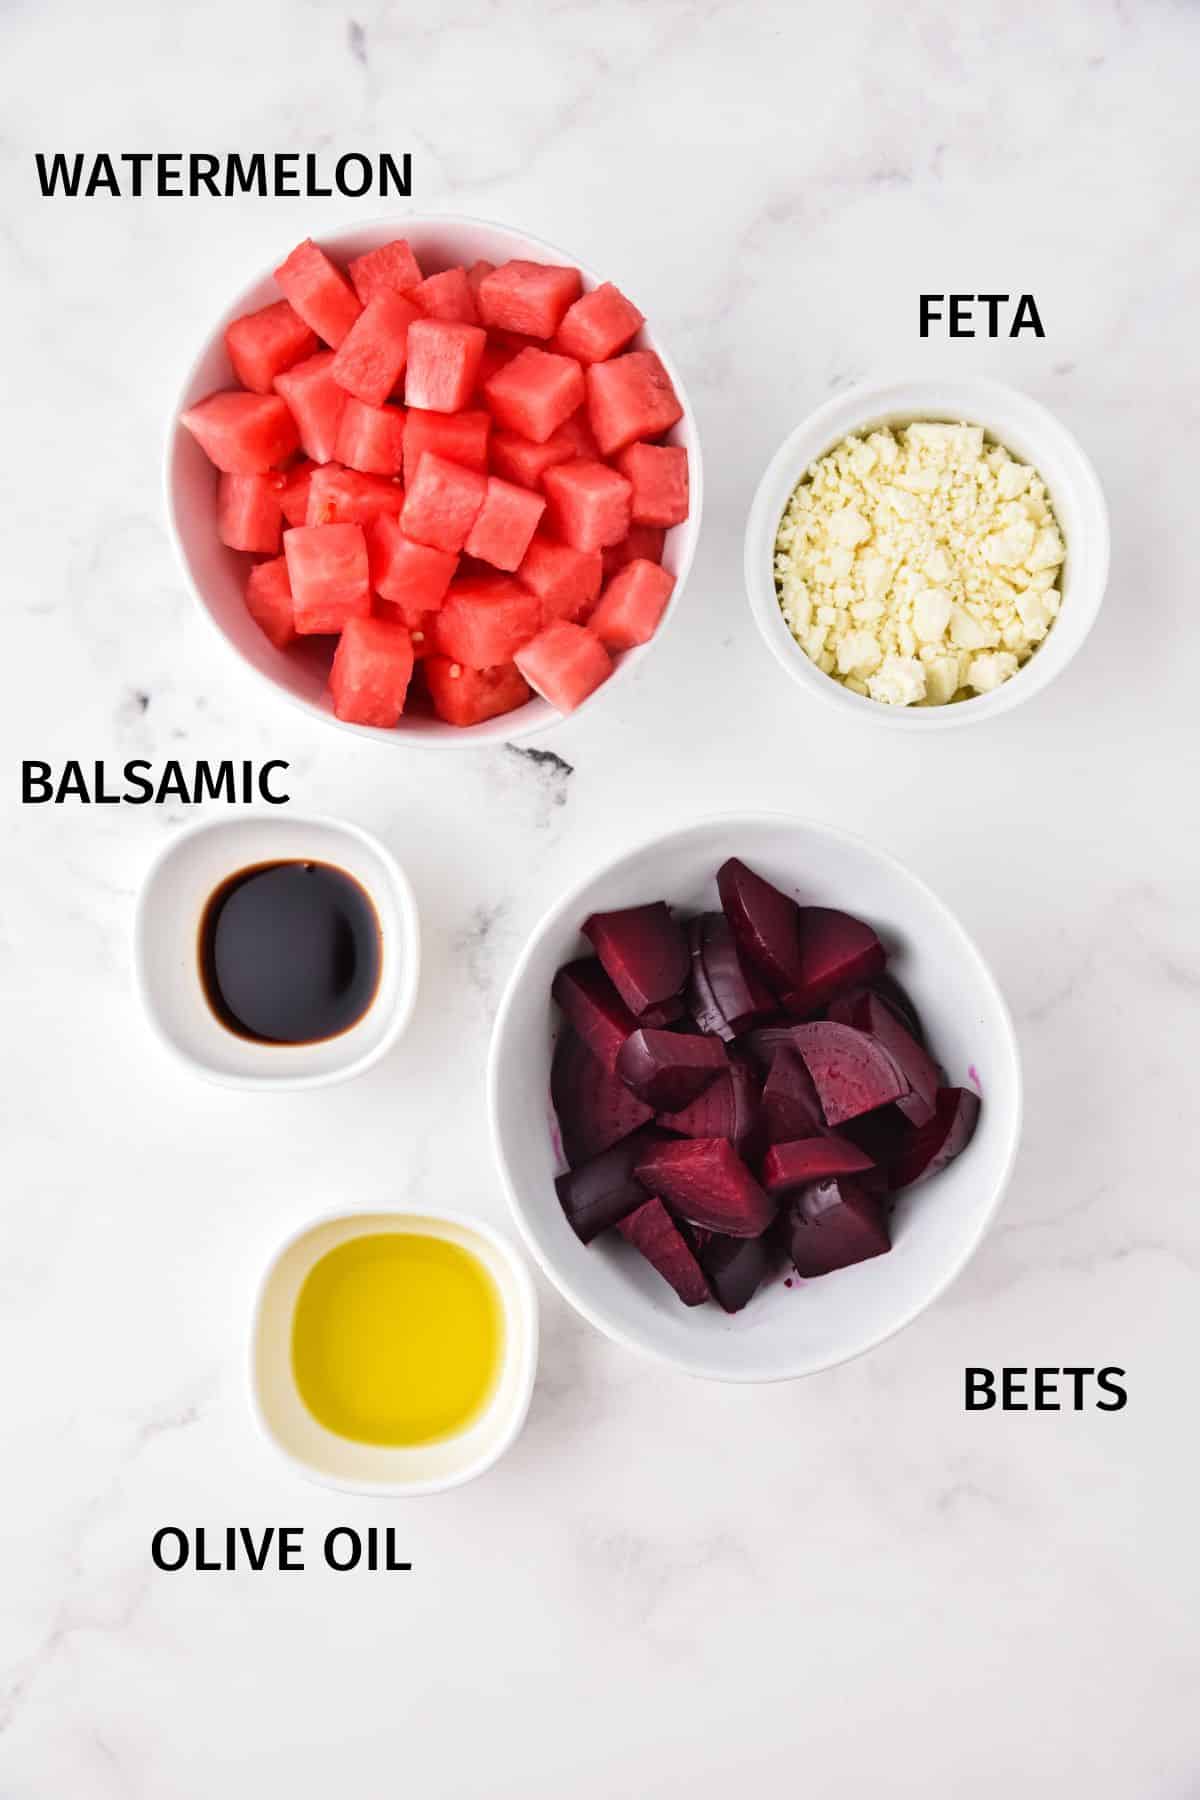 Ingredients for watermelon beet salad in small white bowls on a white surface.